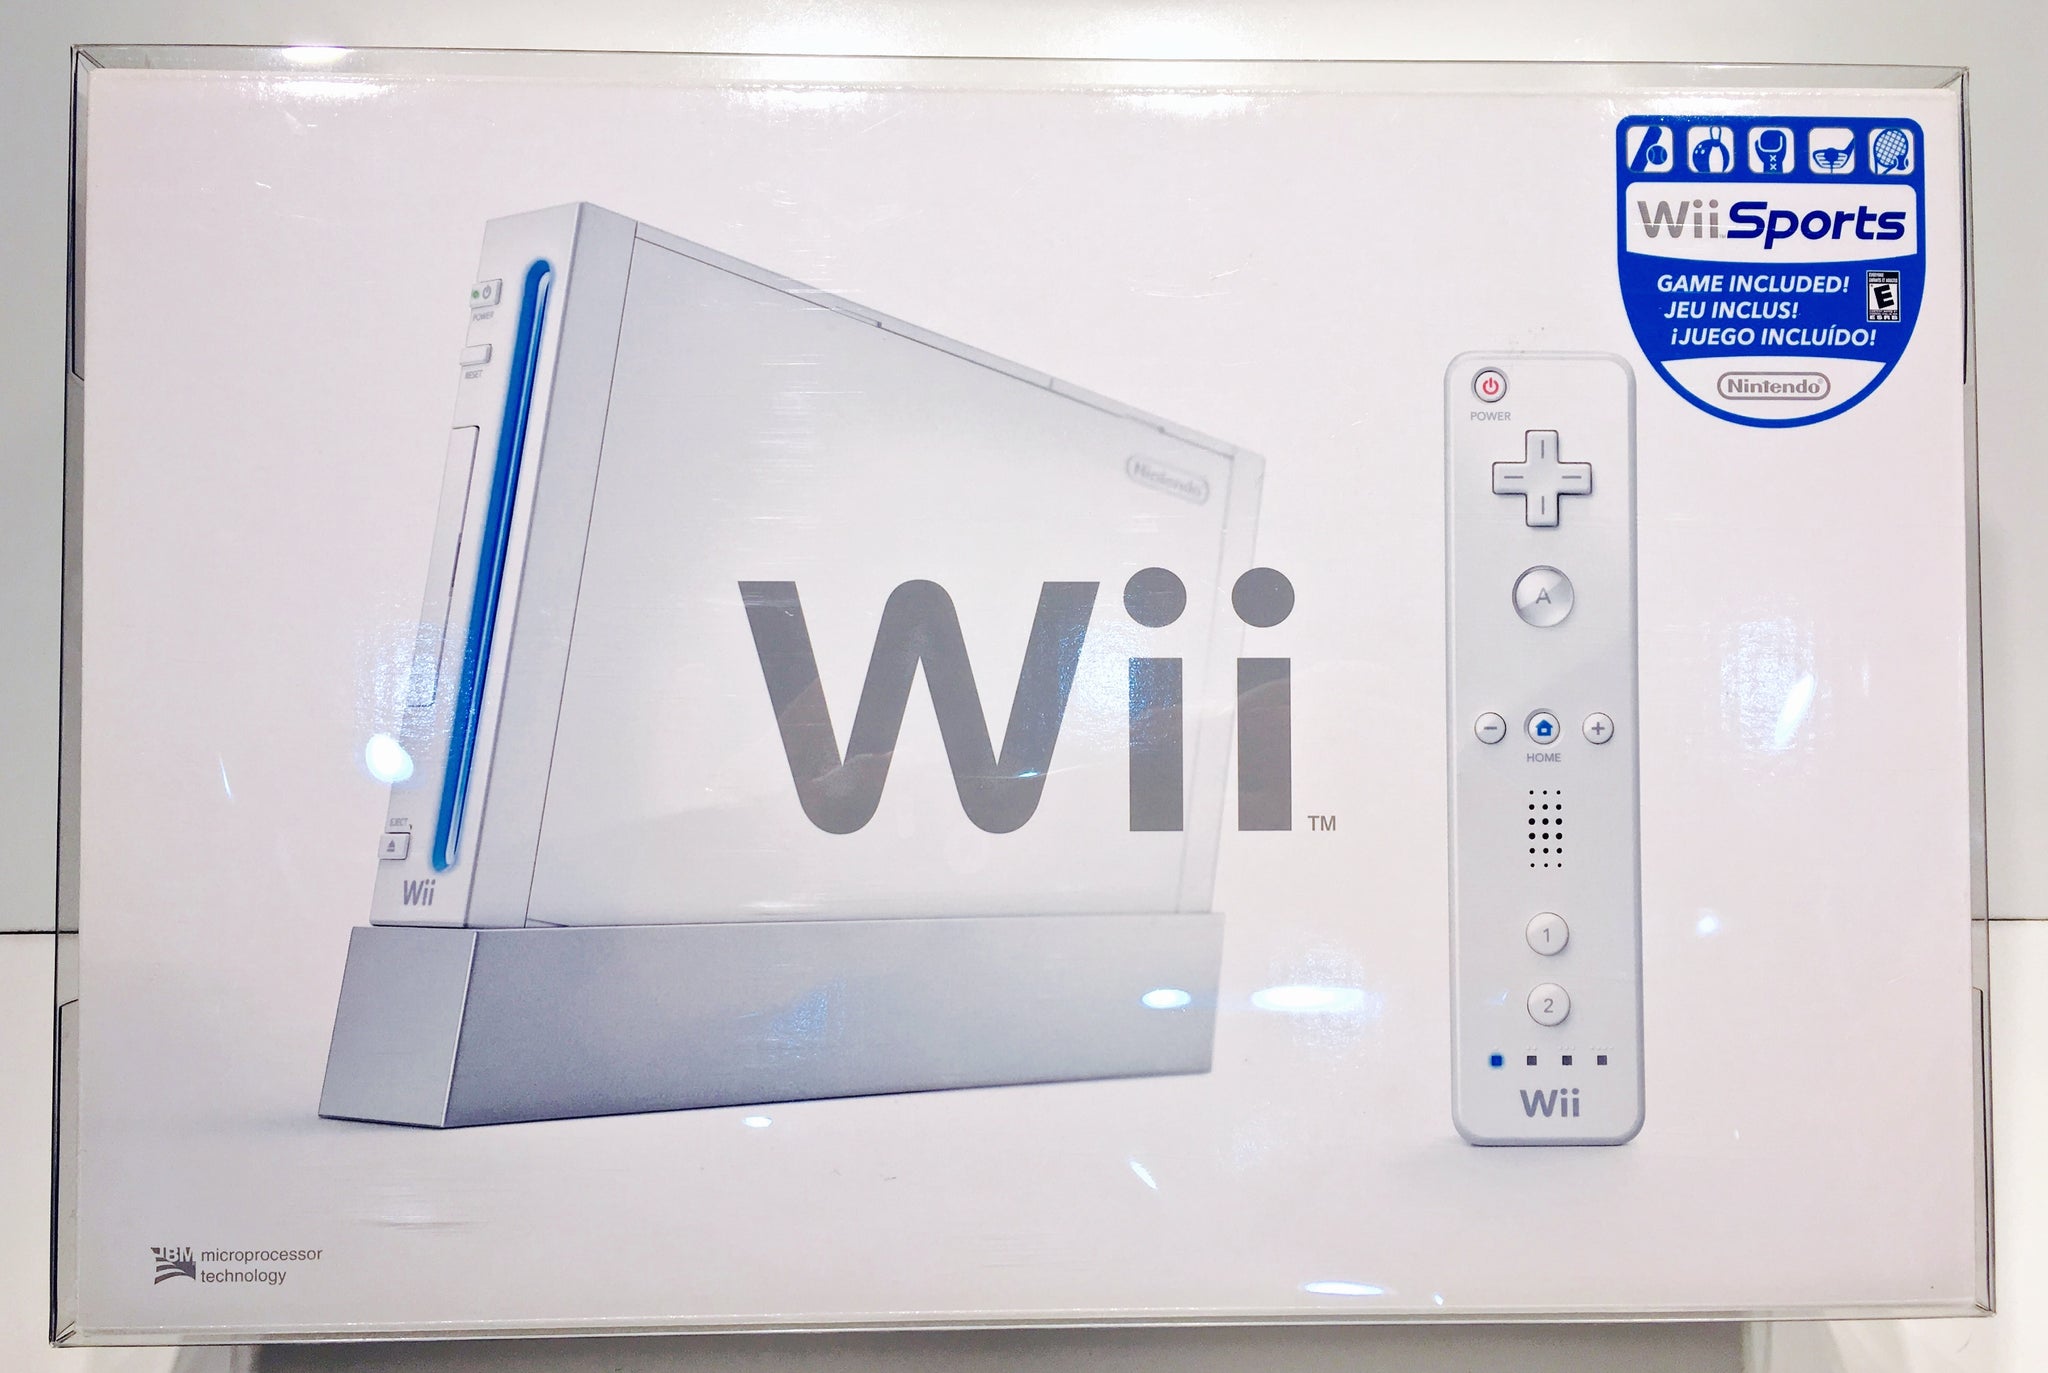 WII CONSOLE - WHITE SYSTEM - SYSTEM BOX - PROTECTOR 0.5MM